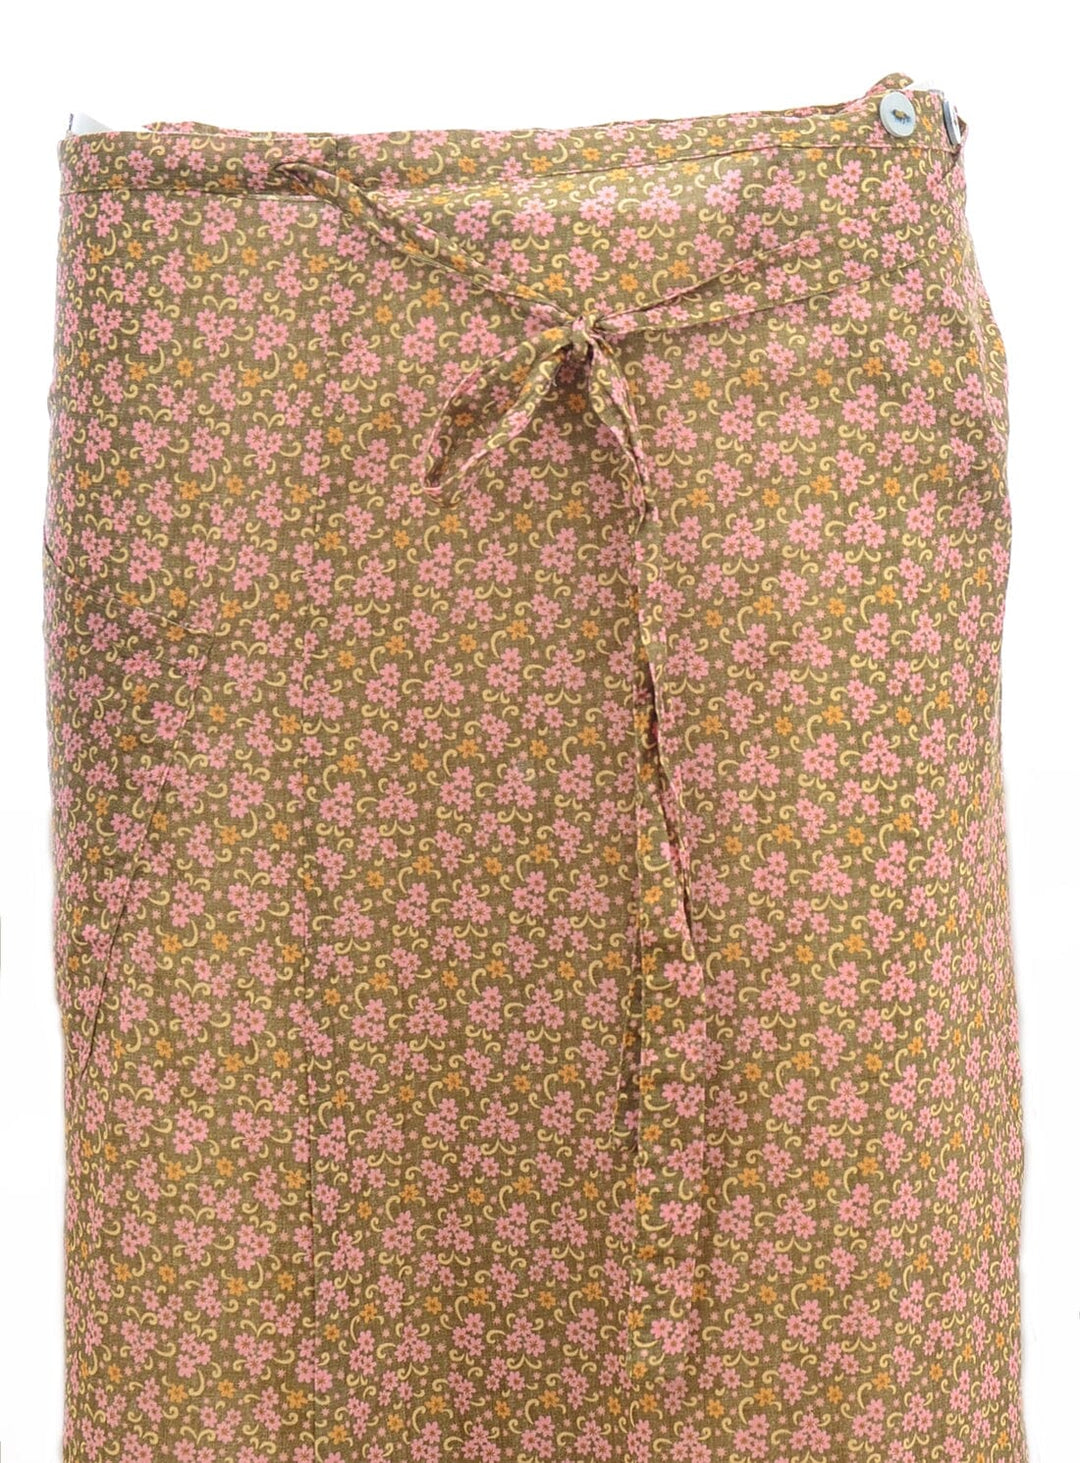 Daisy Wrap Cotton Skirt Faded Flower Skirts YBDFinds 